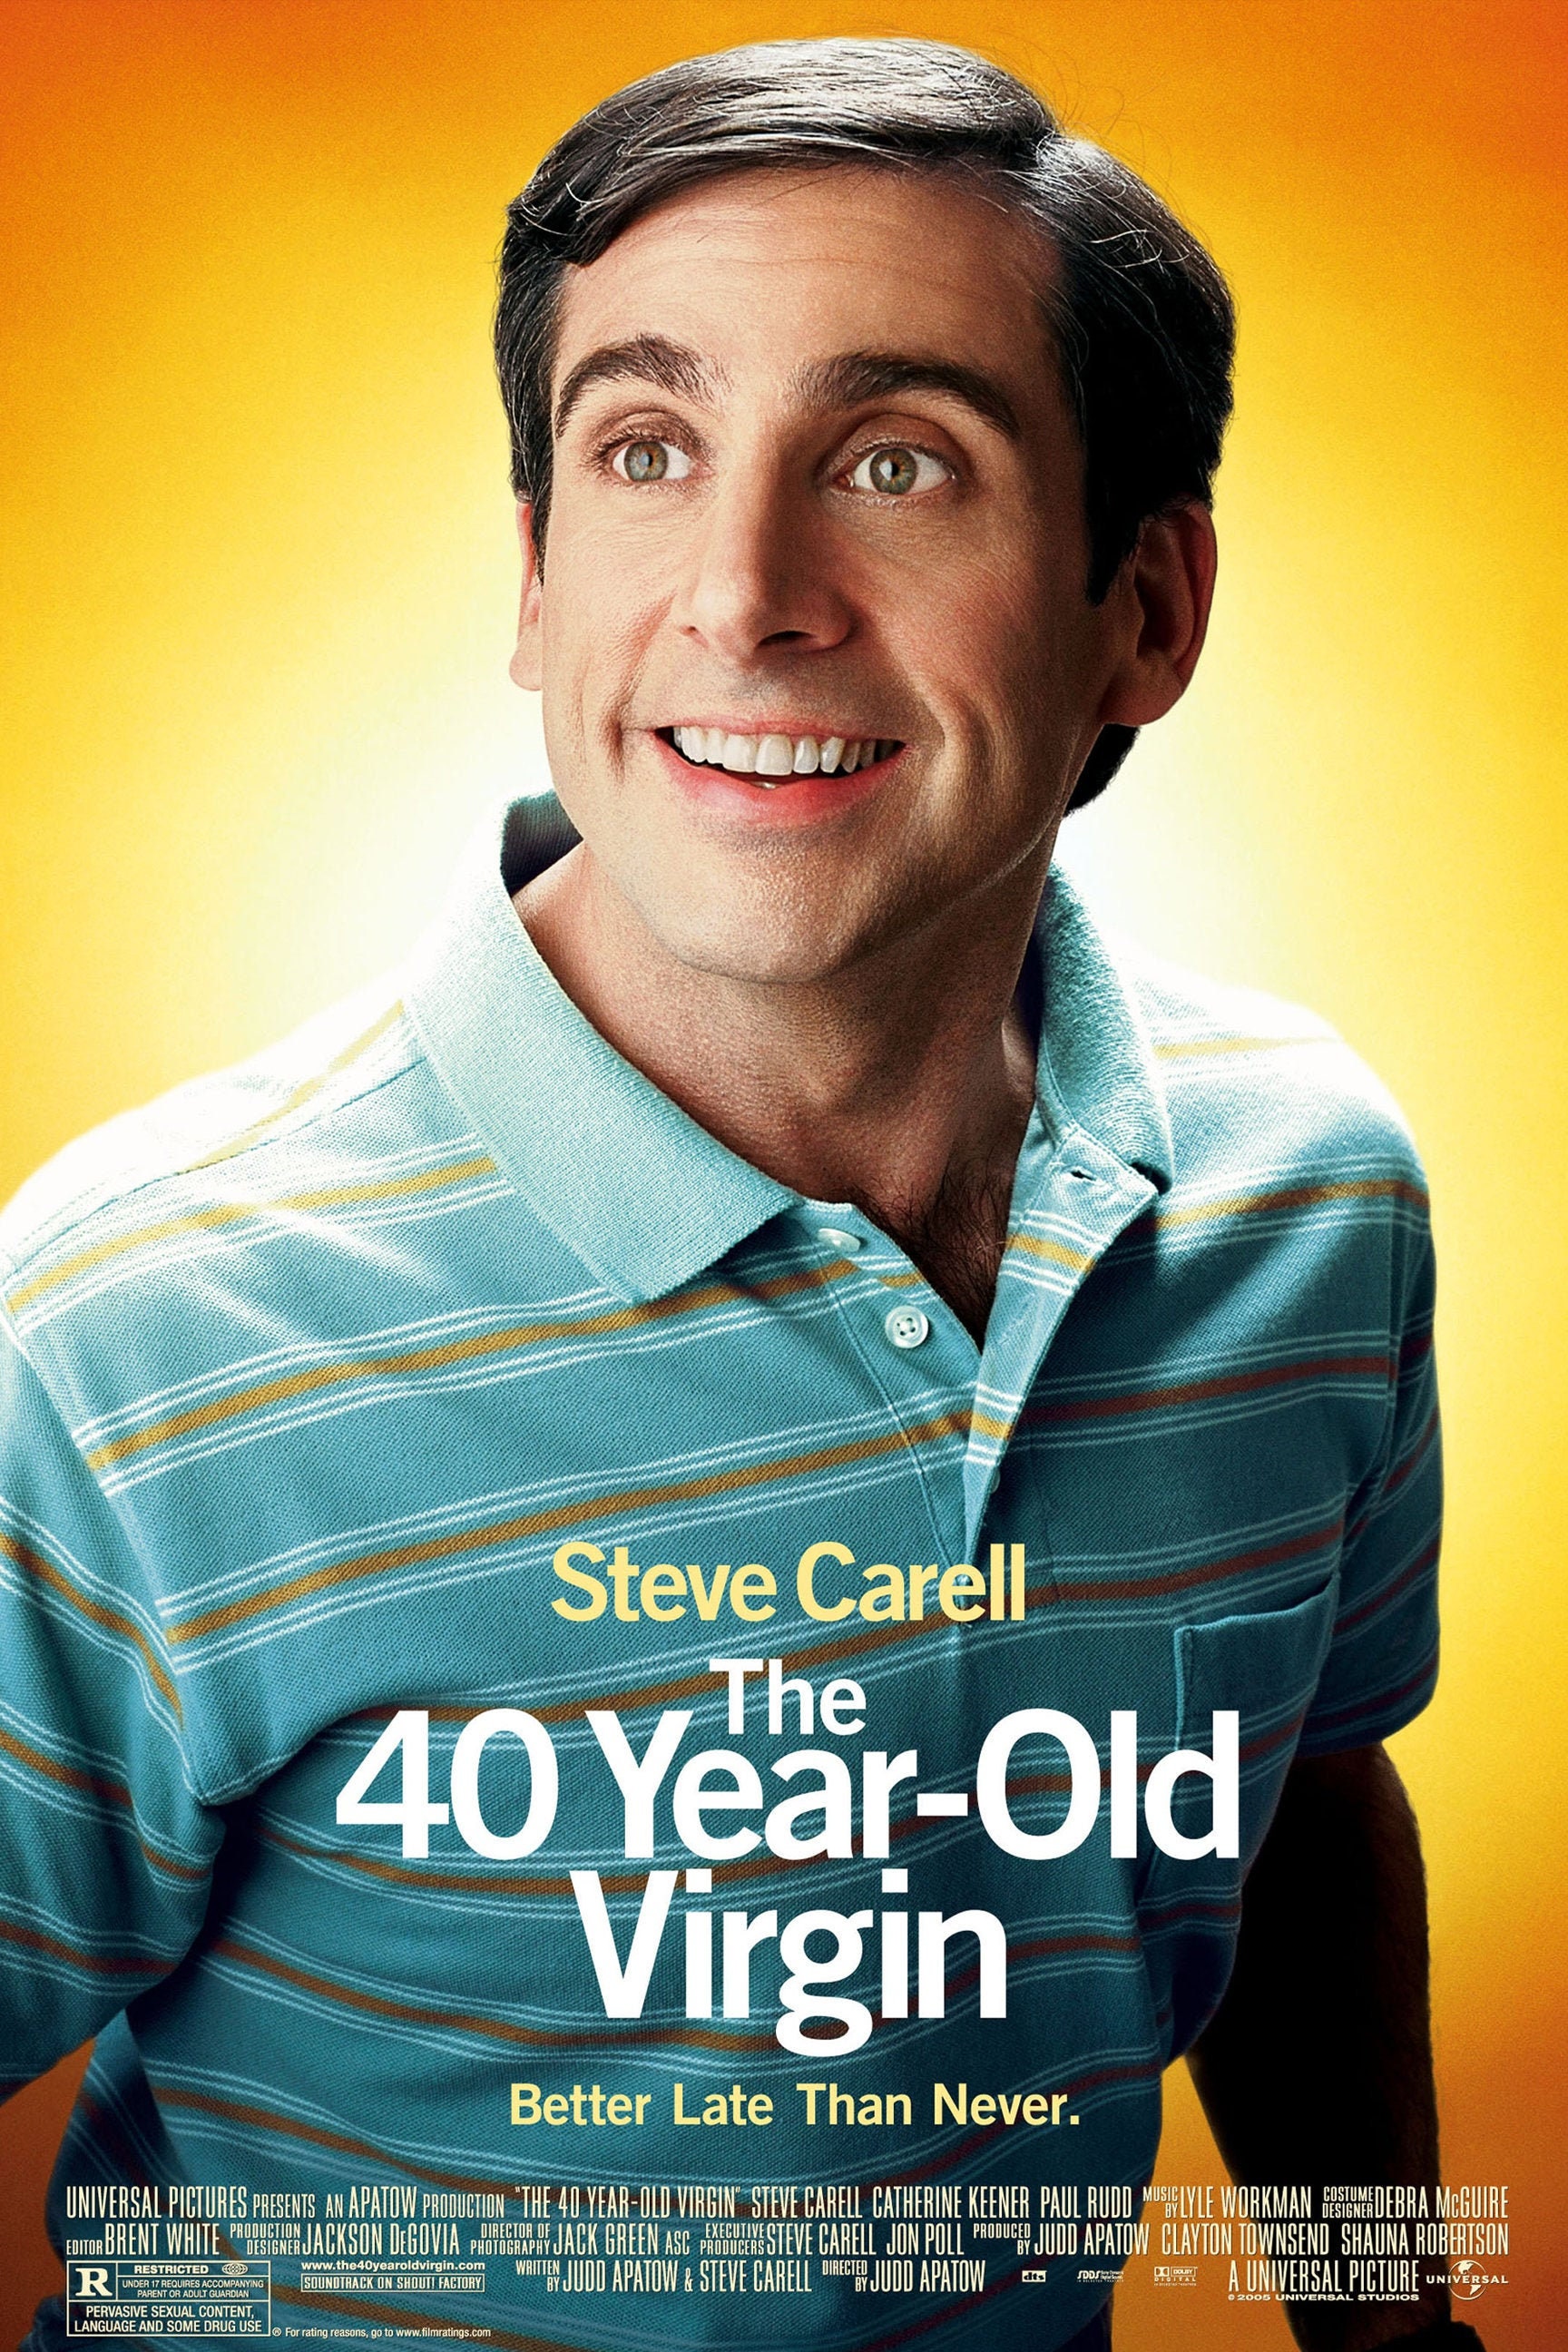 The 40 Year Old Virgin Movie Poster 24x36 Inches Etsy 